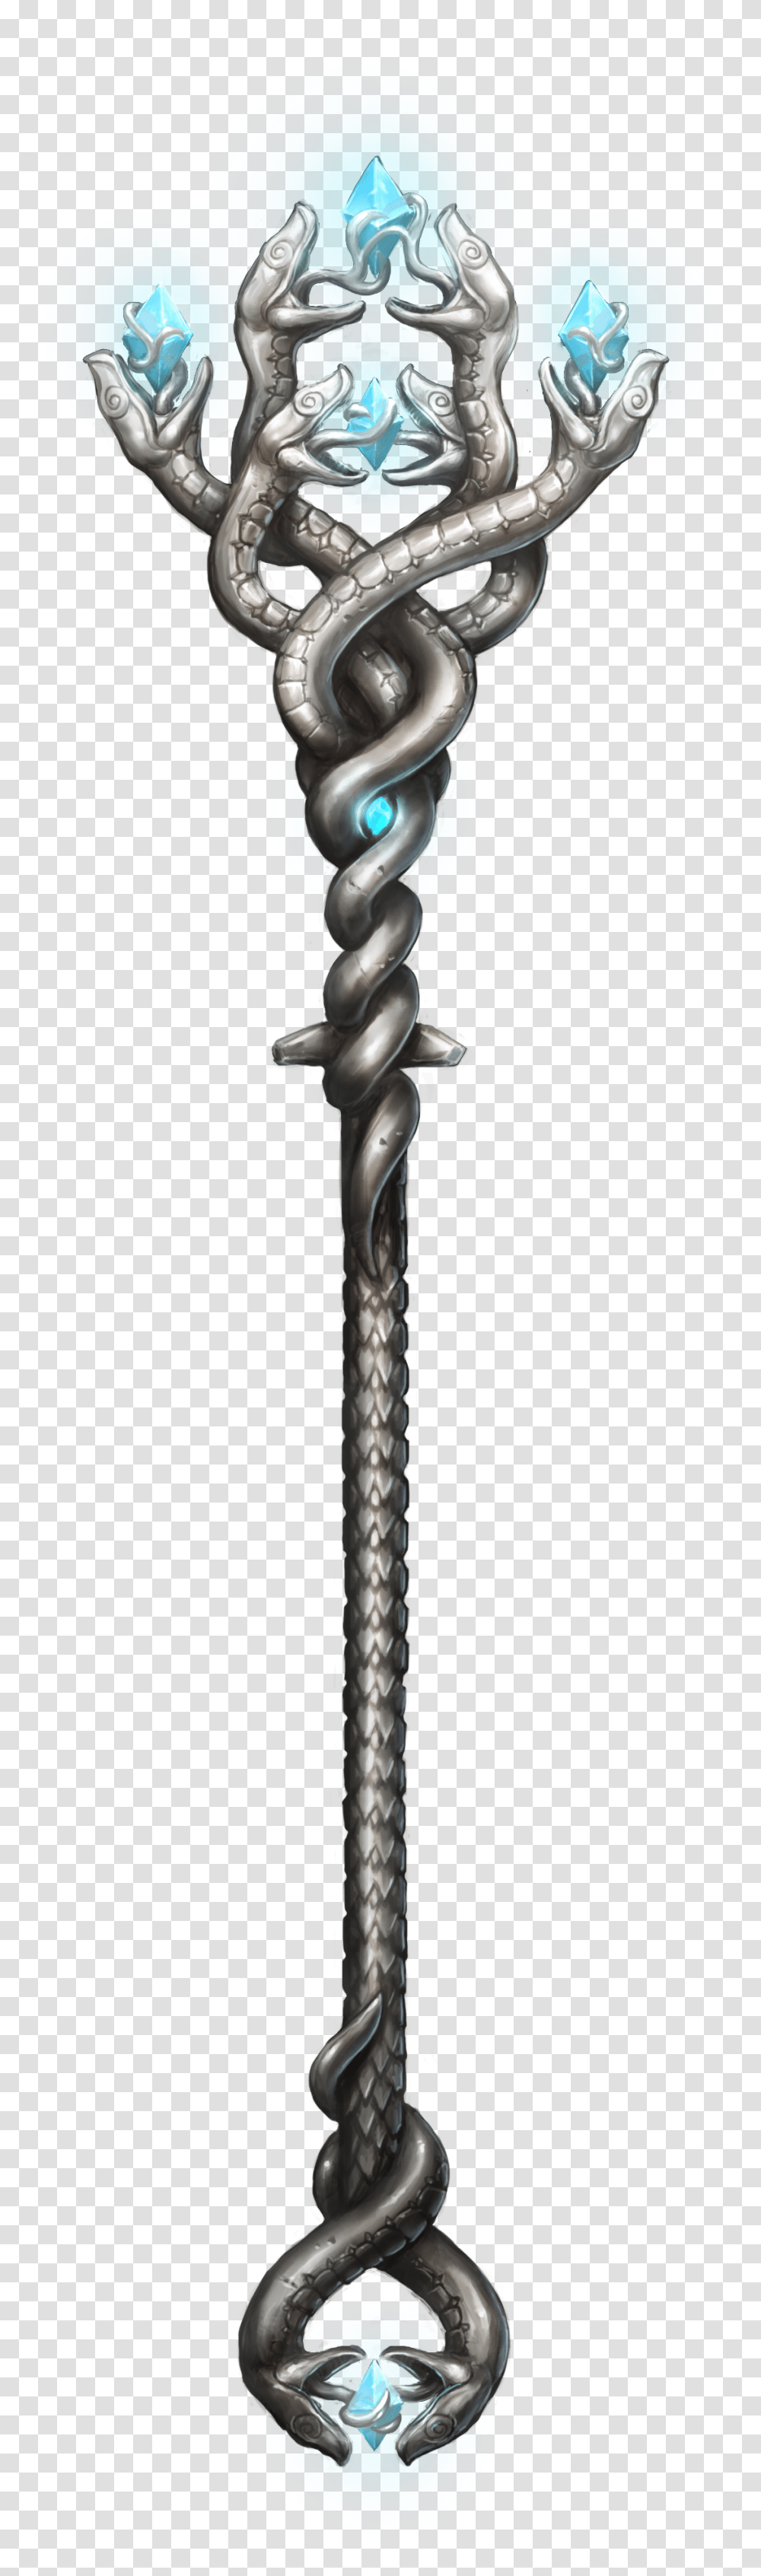 Staff Arcane Focus Staff Dungeons And Dragons, Sword, Blade, Weapon, Weaponry Transparent Png